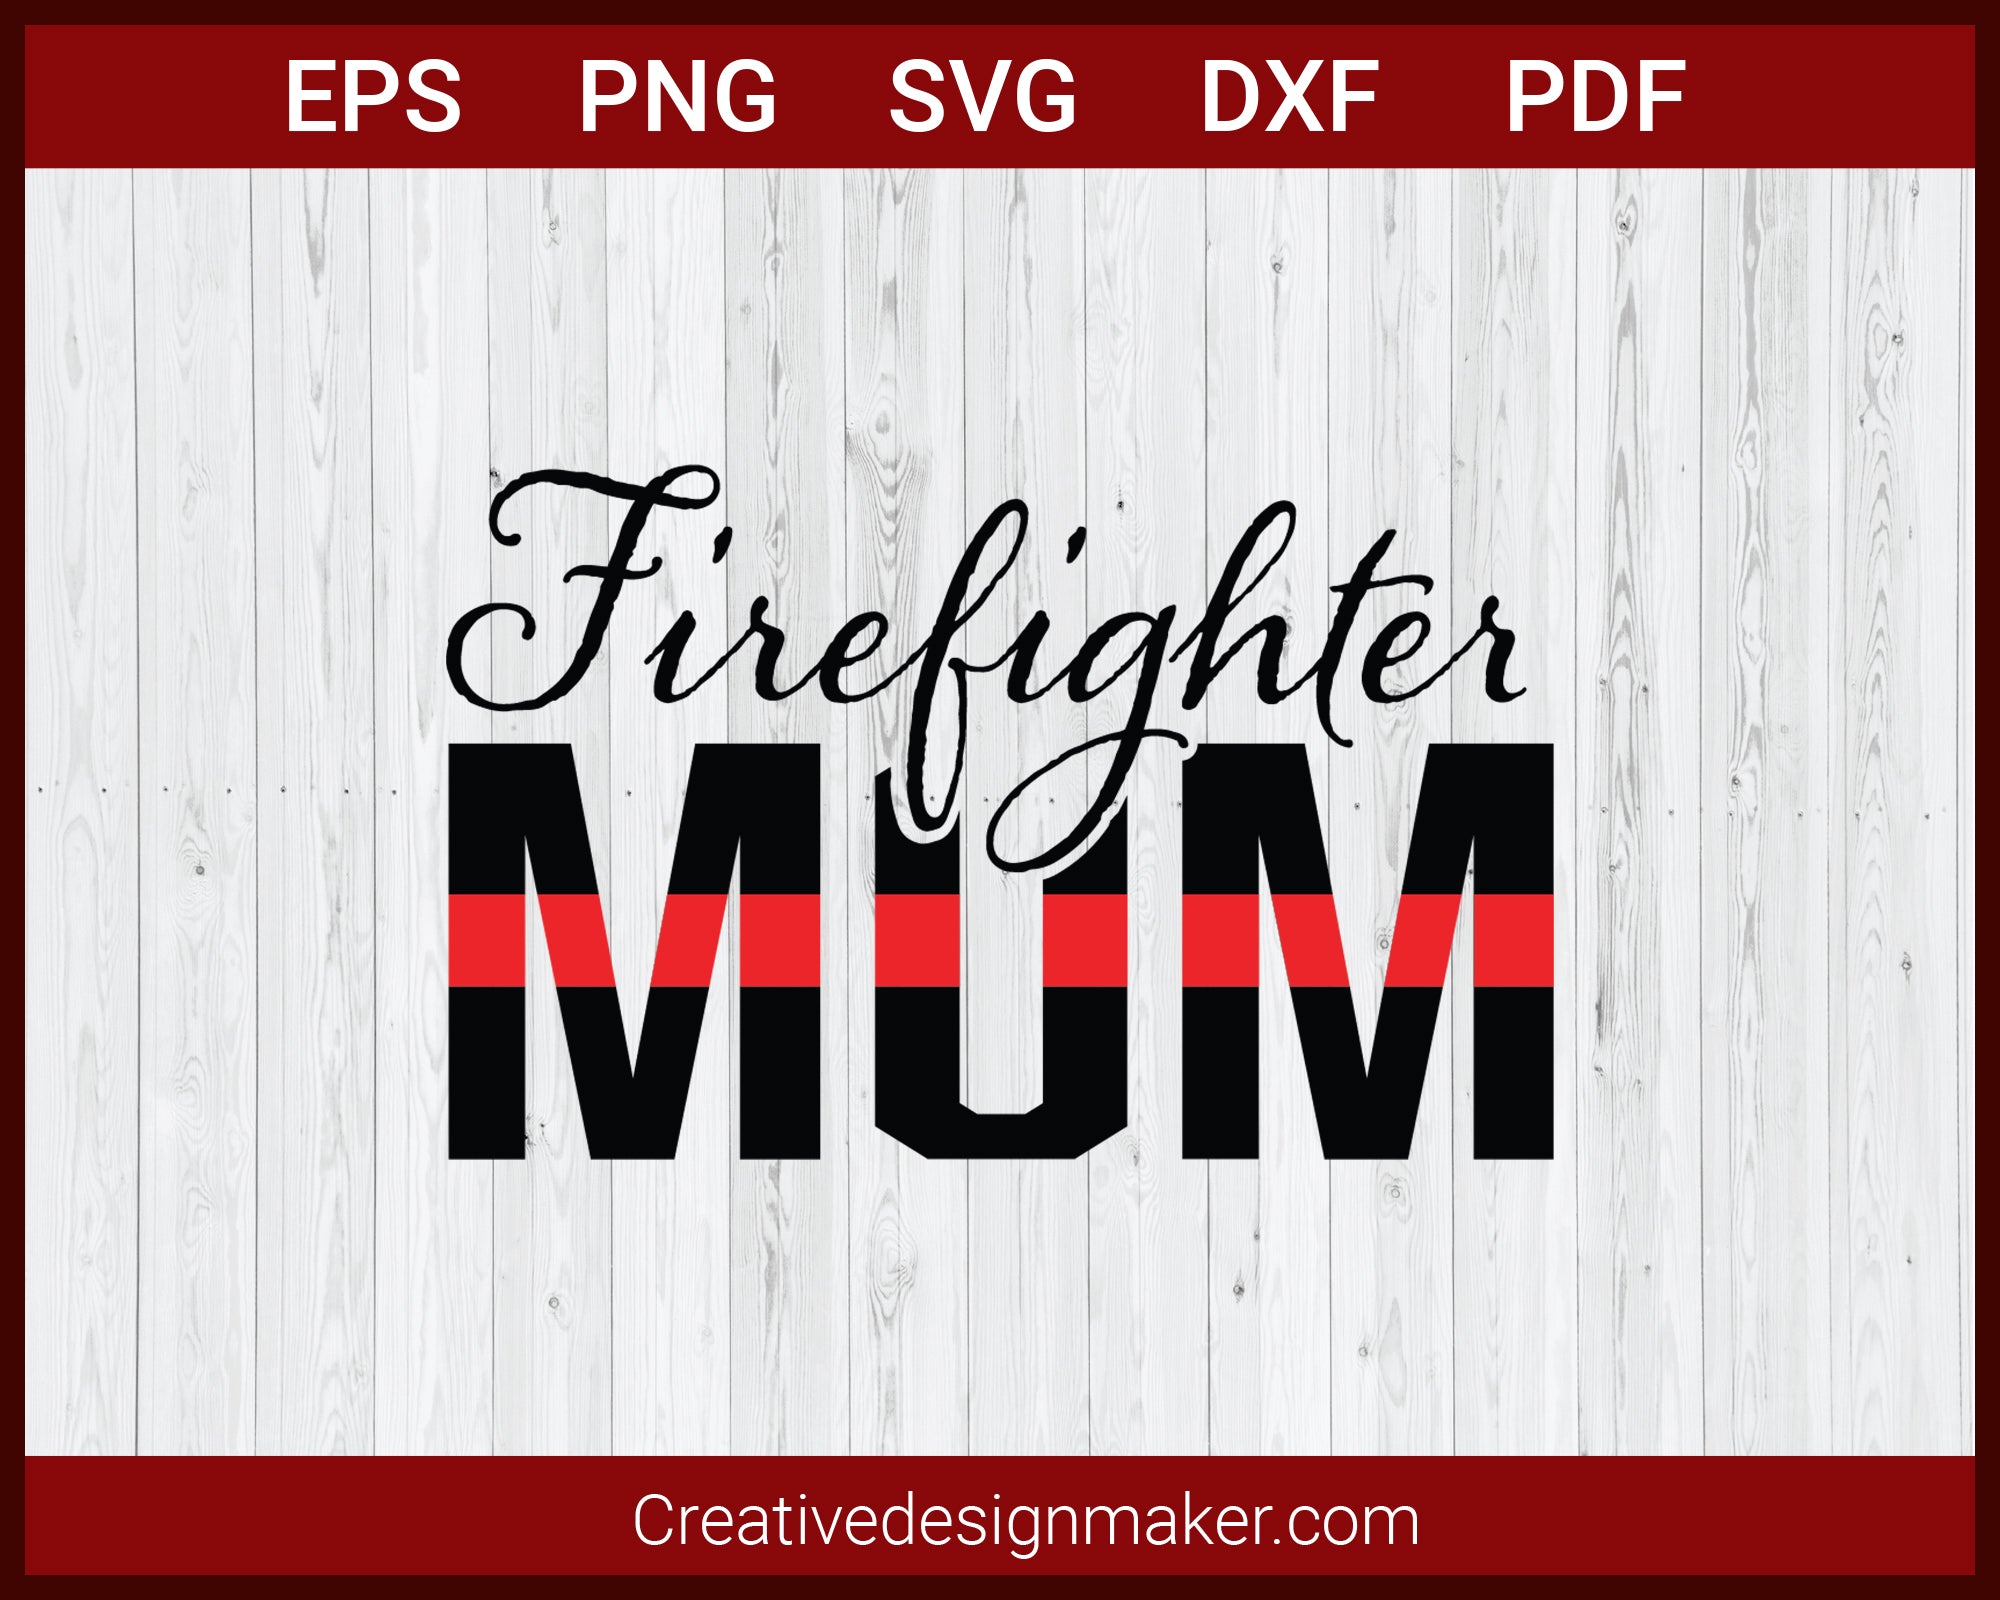 Firefighter Mum T-shirt svg Cut File For Cricut Silhouette eps png dxf Printable Files